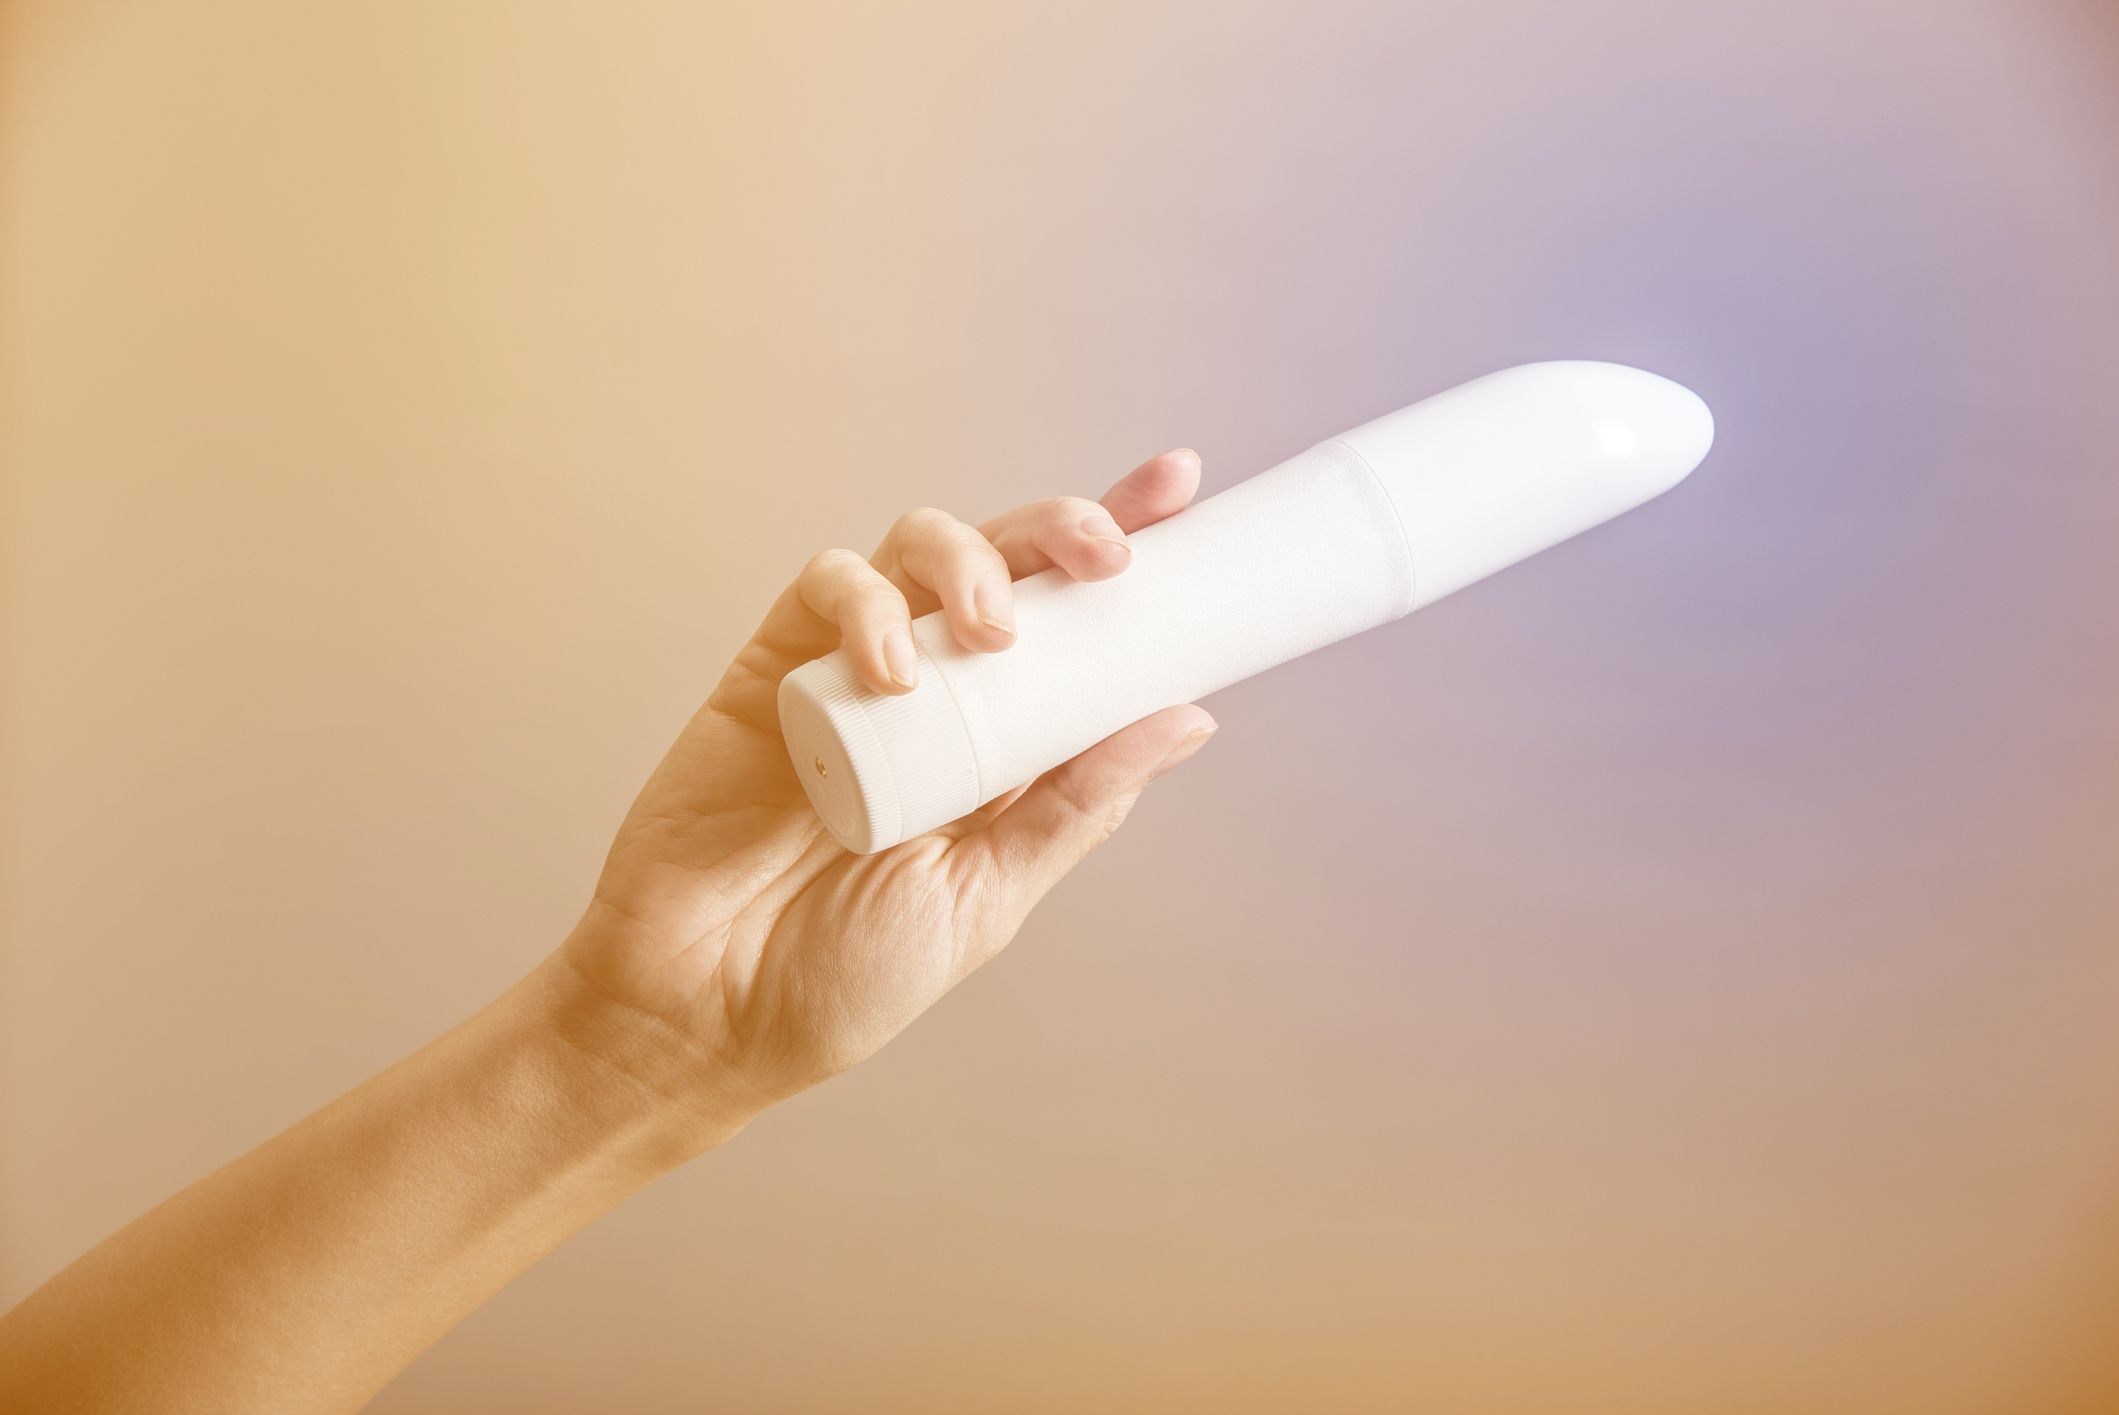 6 things you should know about cleaning your sex toys